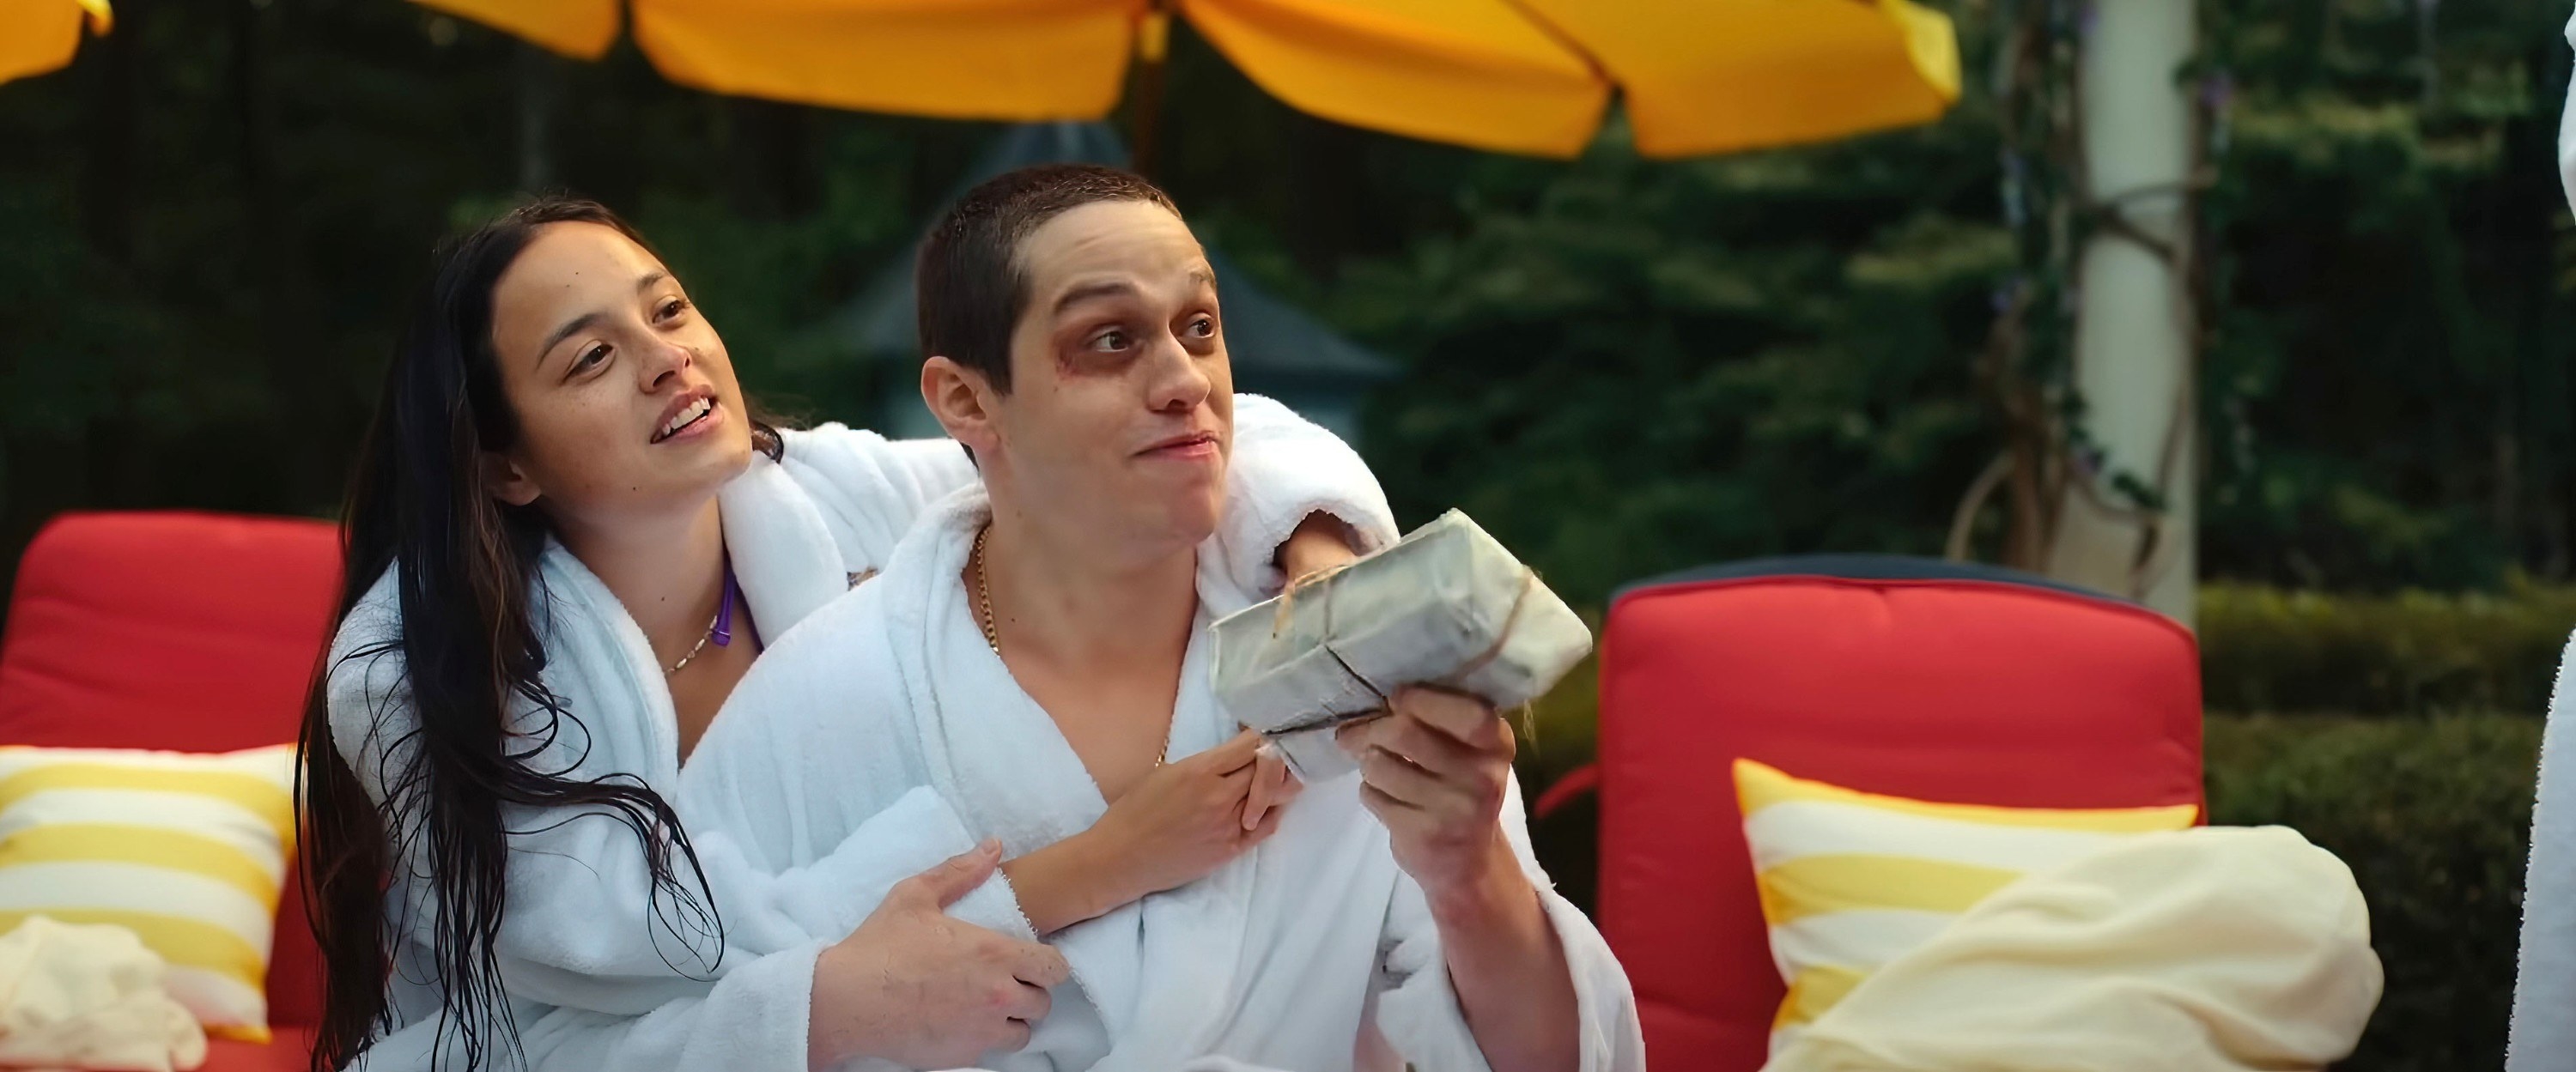 Chase holds Pete from behind as they lounge by the pool in bathrobes in a scene from Bodies